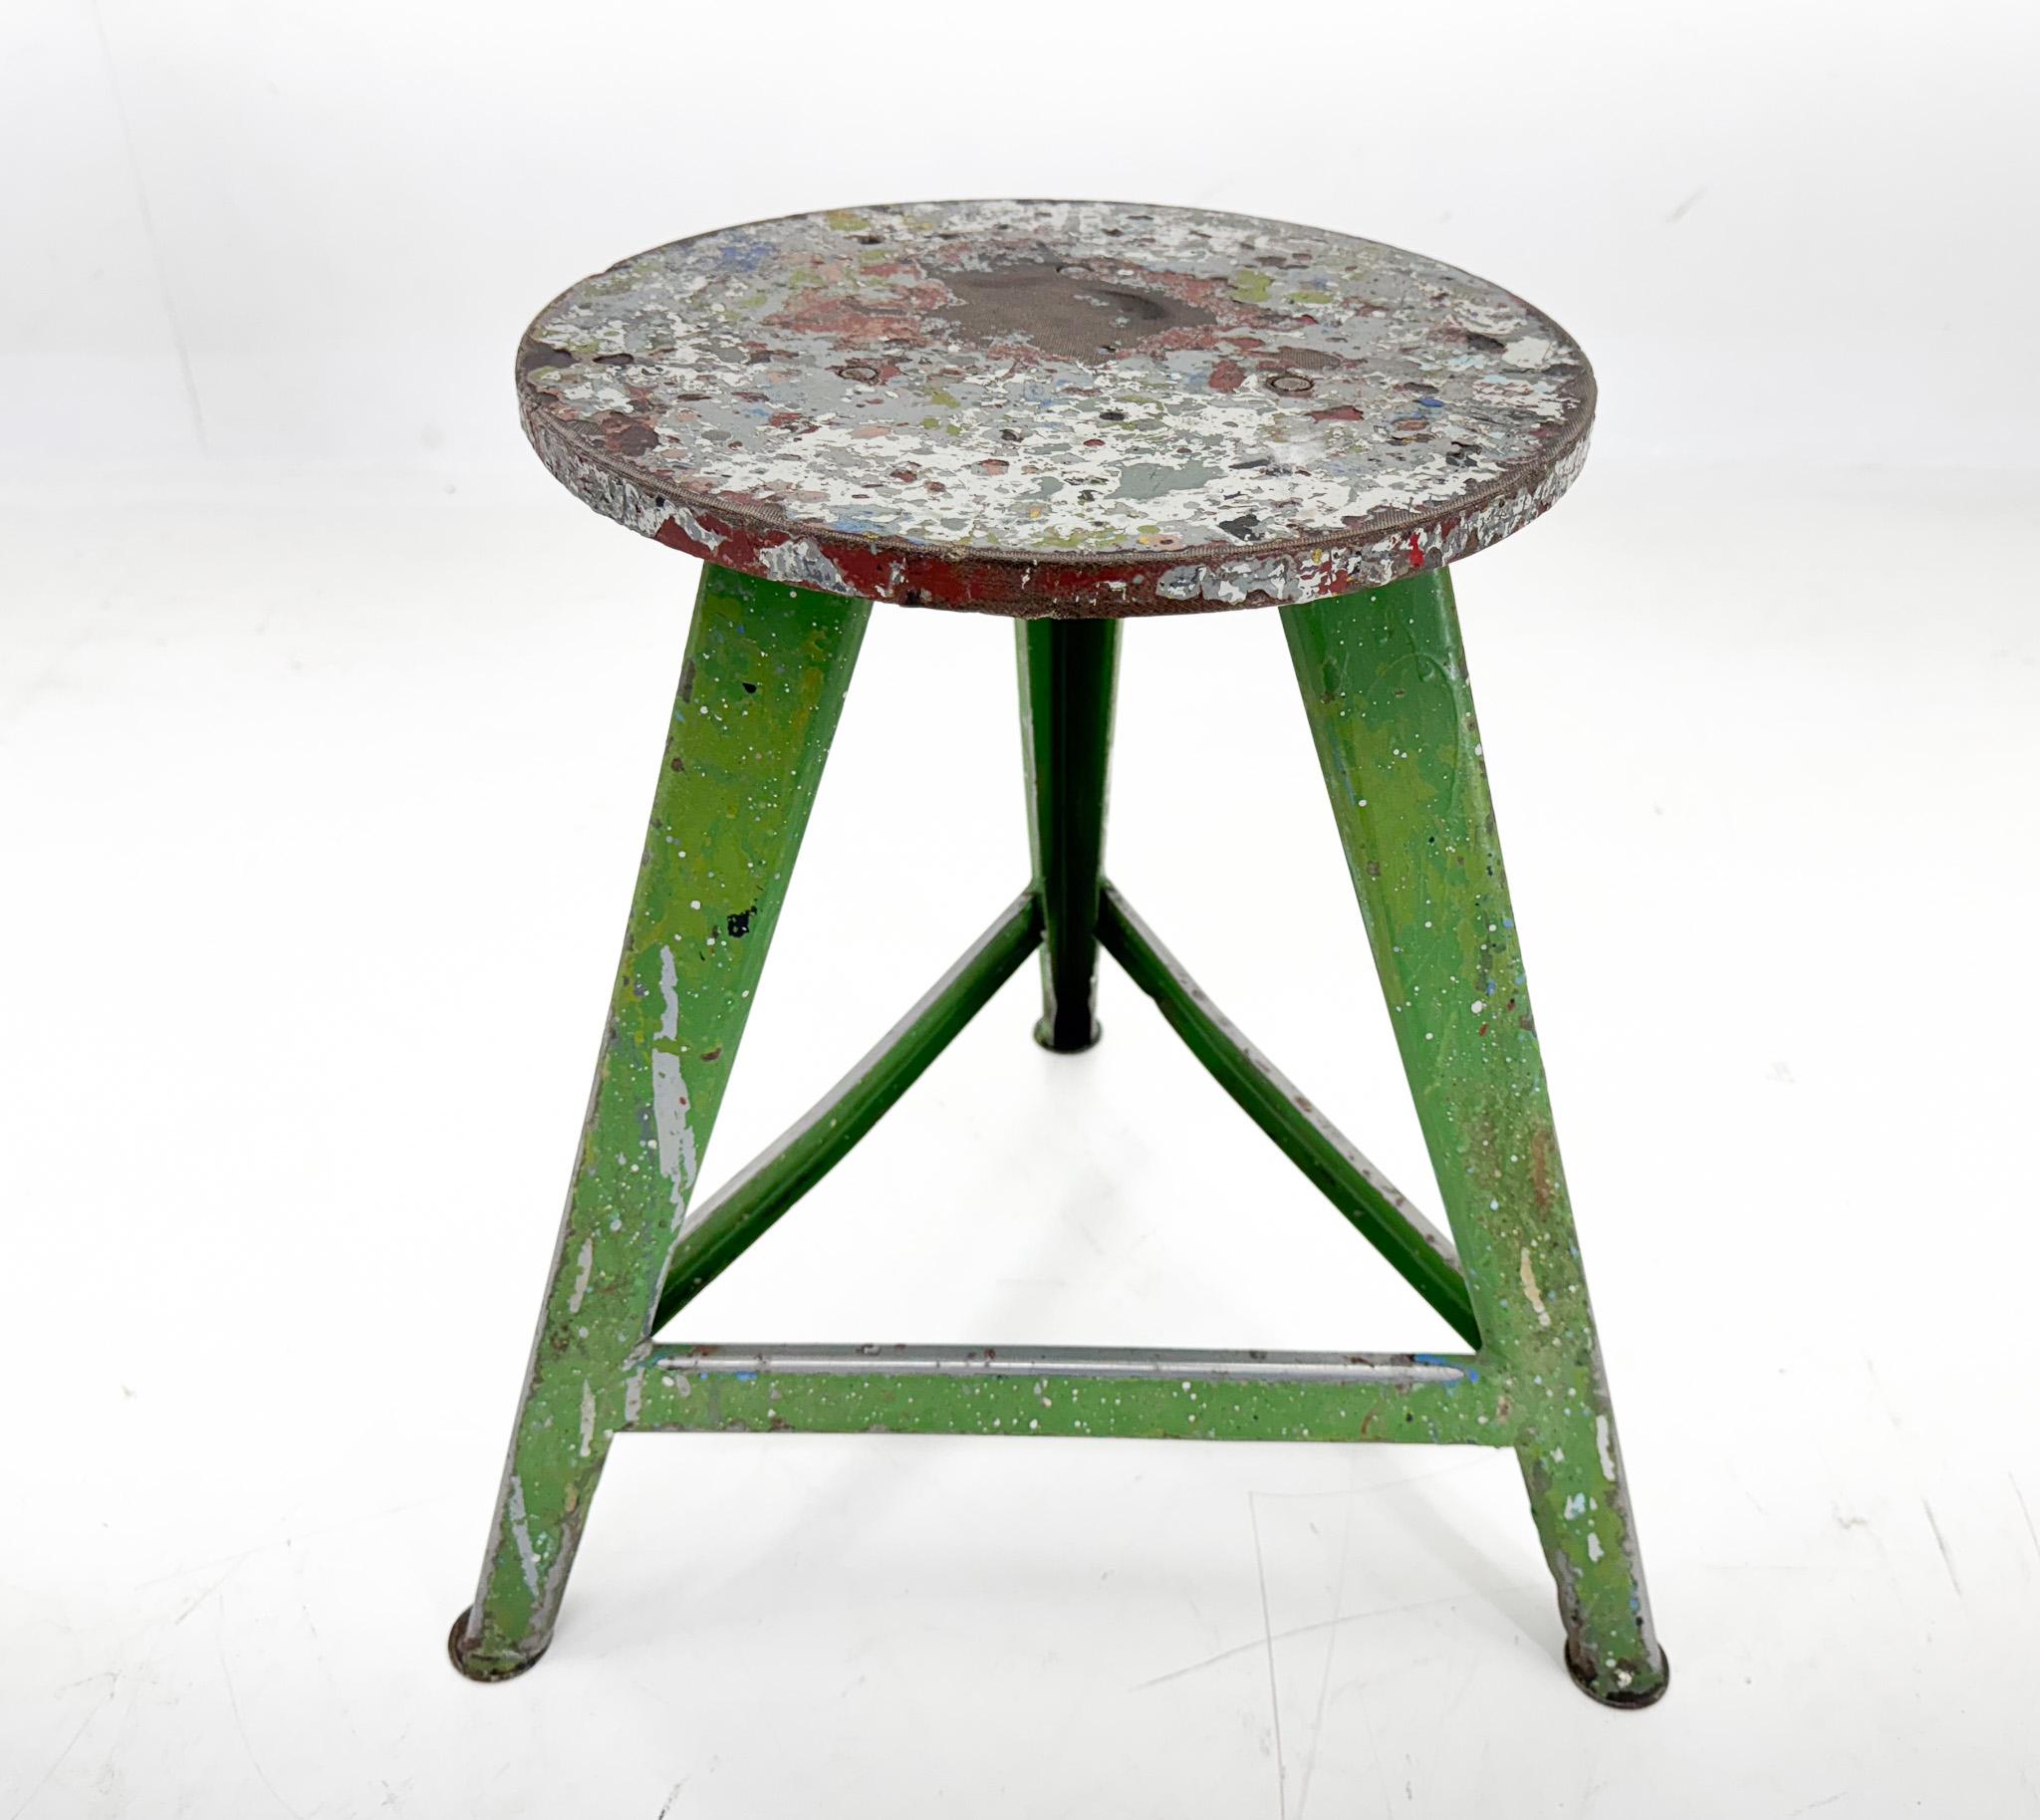 Vintage industrial tripod stool, made of steel and wood. Saved from a factory in former Czechoslovakia. The diameter of the seat is 31 cm. The widest point at the bottom of the legs is 47 cm. 